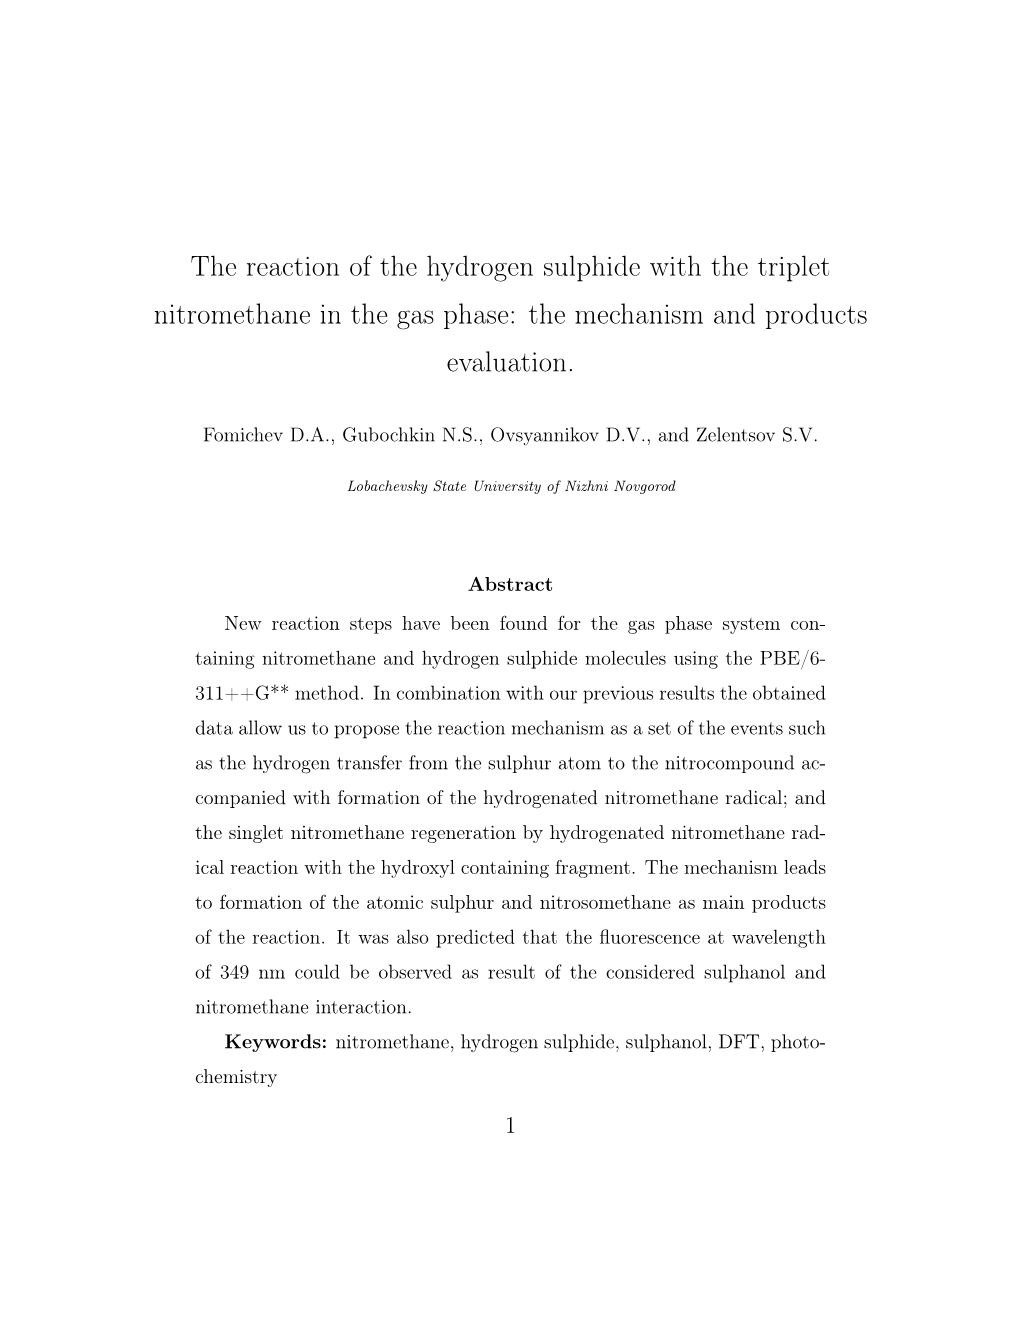 The Reaction of the Hydrogen Sulphide with the Triplet Nitromethane in the Gas Phase: the Mechanism and Products Evaluation